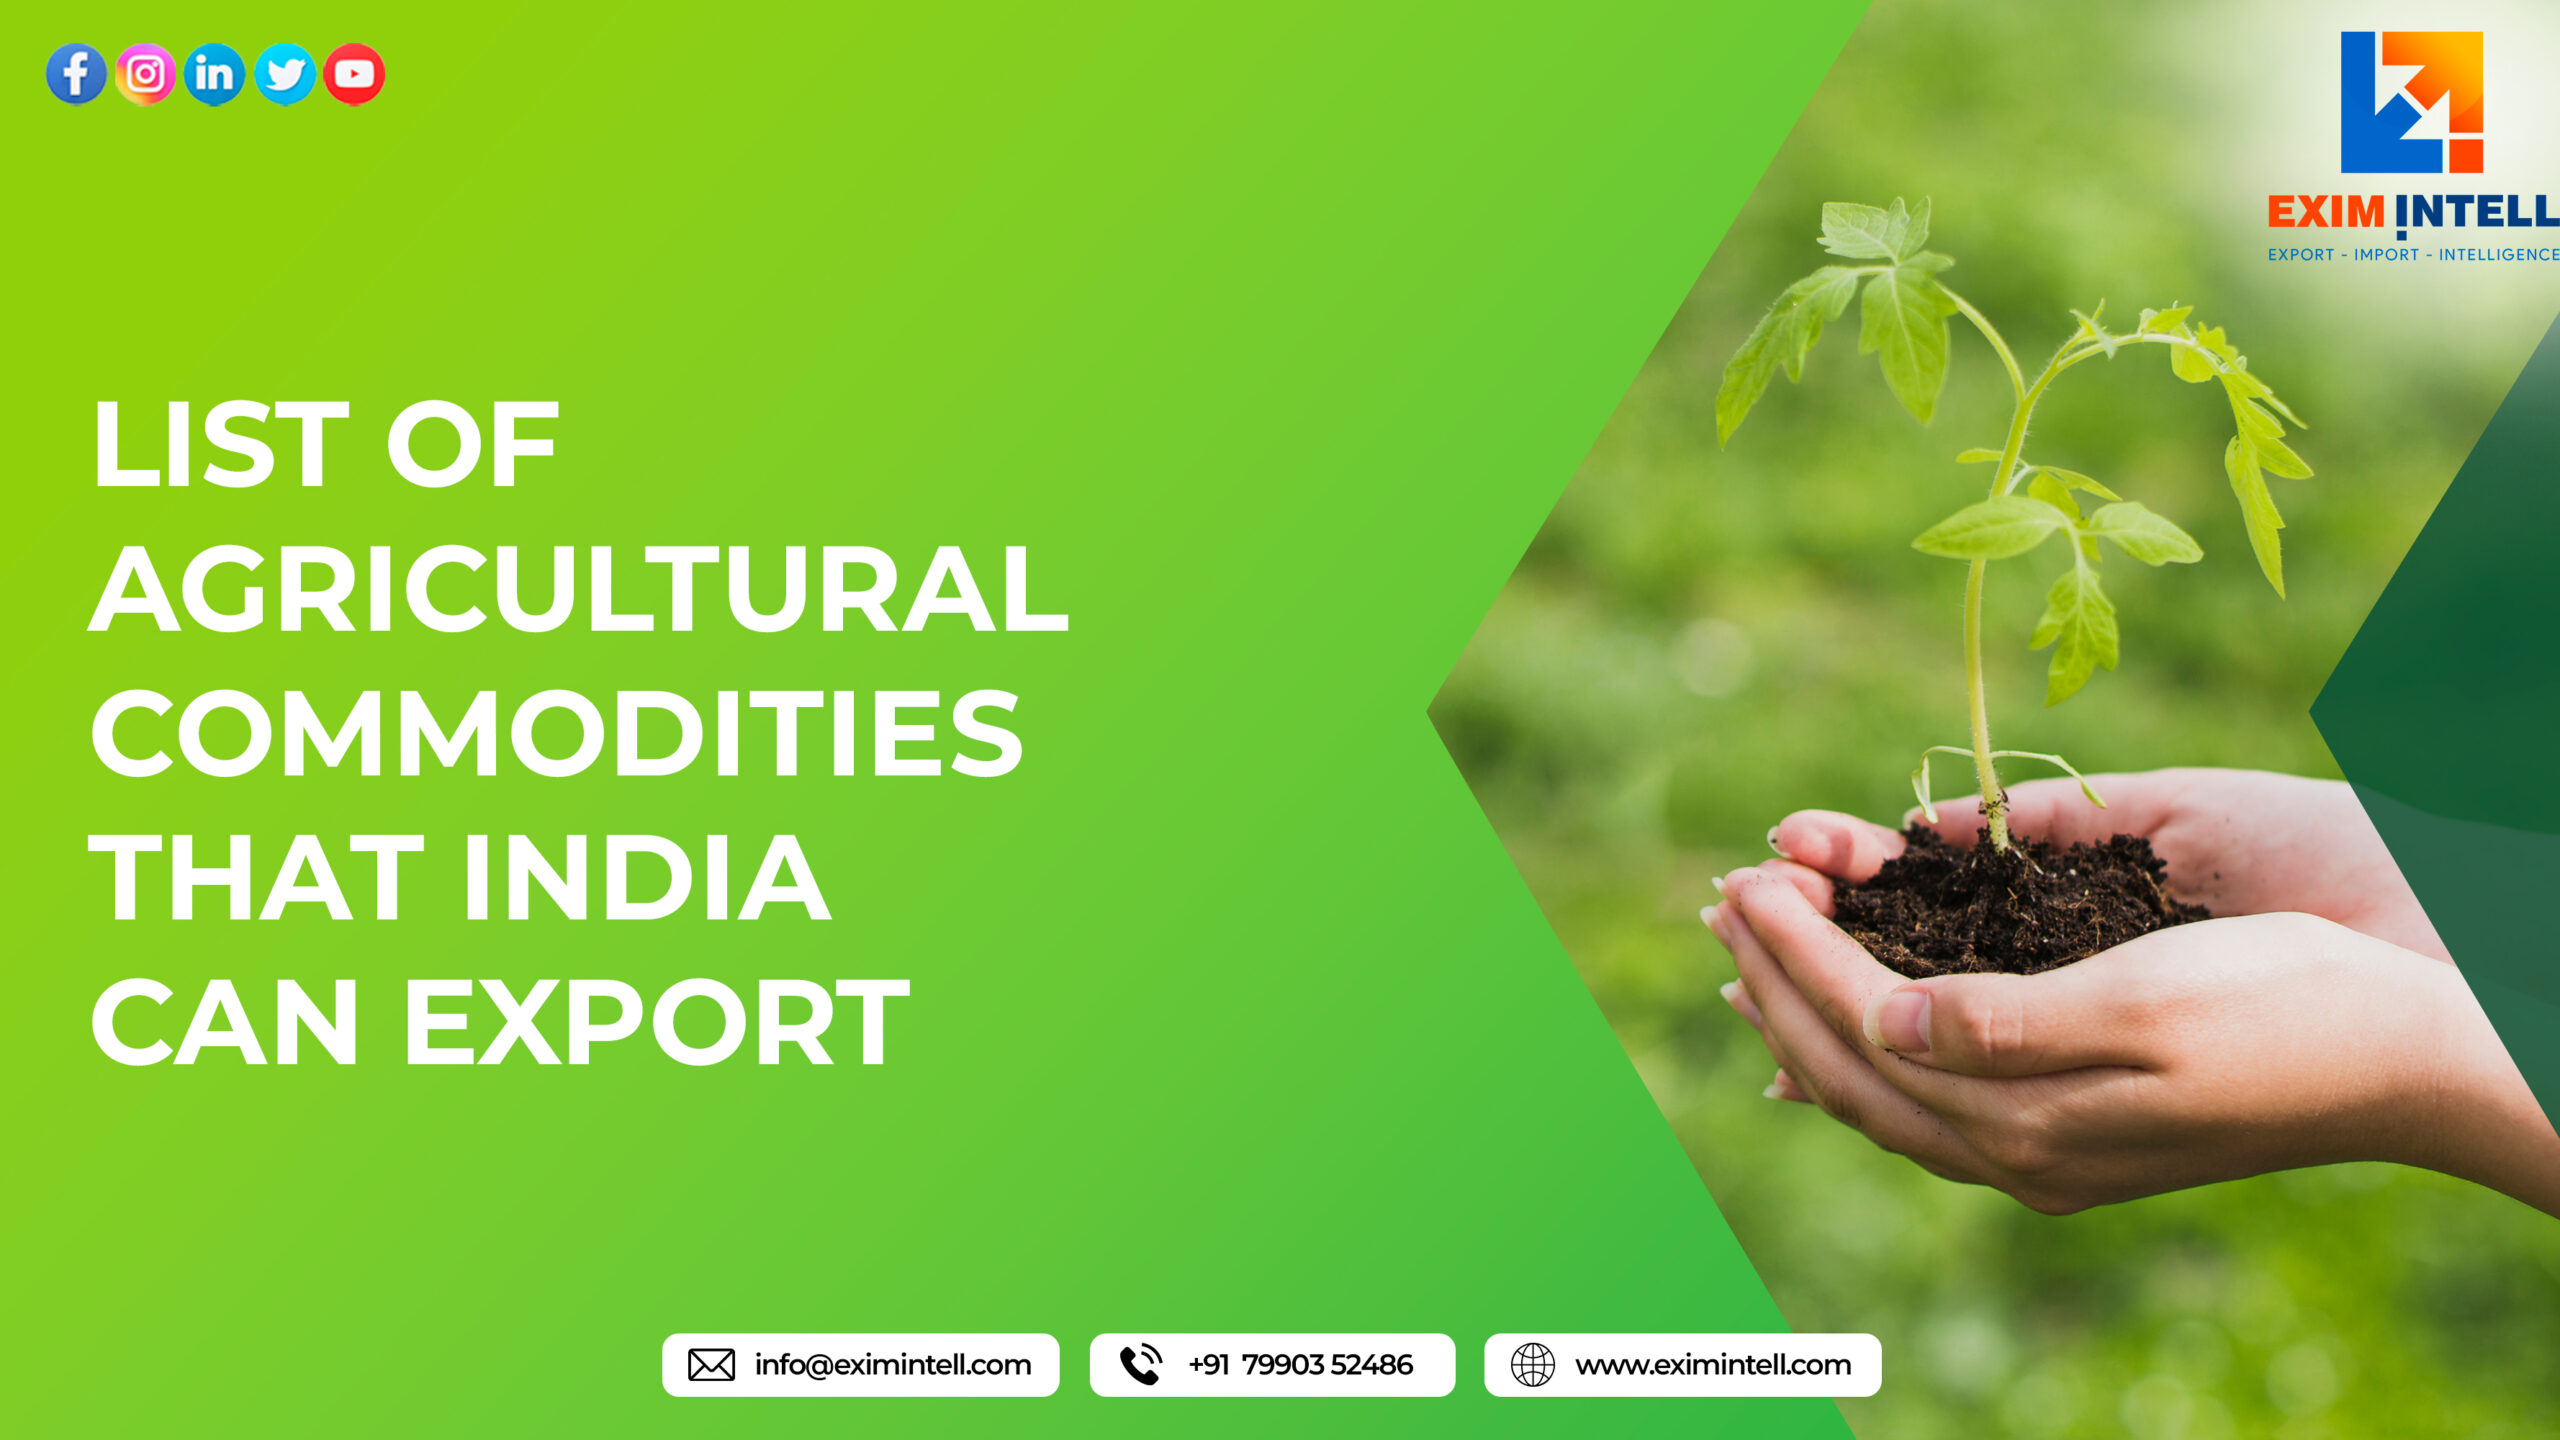 List of agricultural commodities that India can export